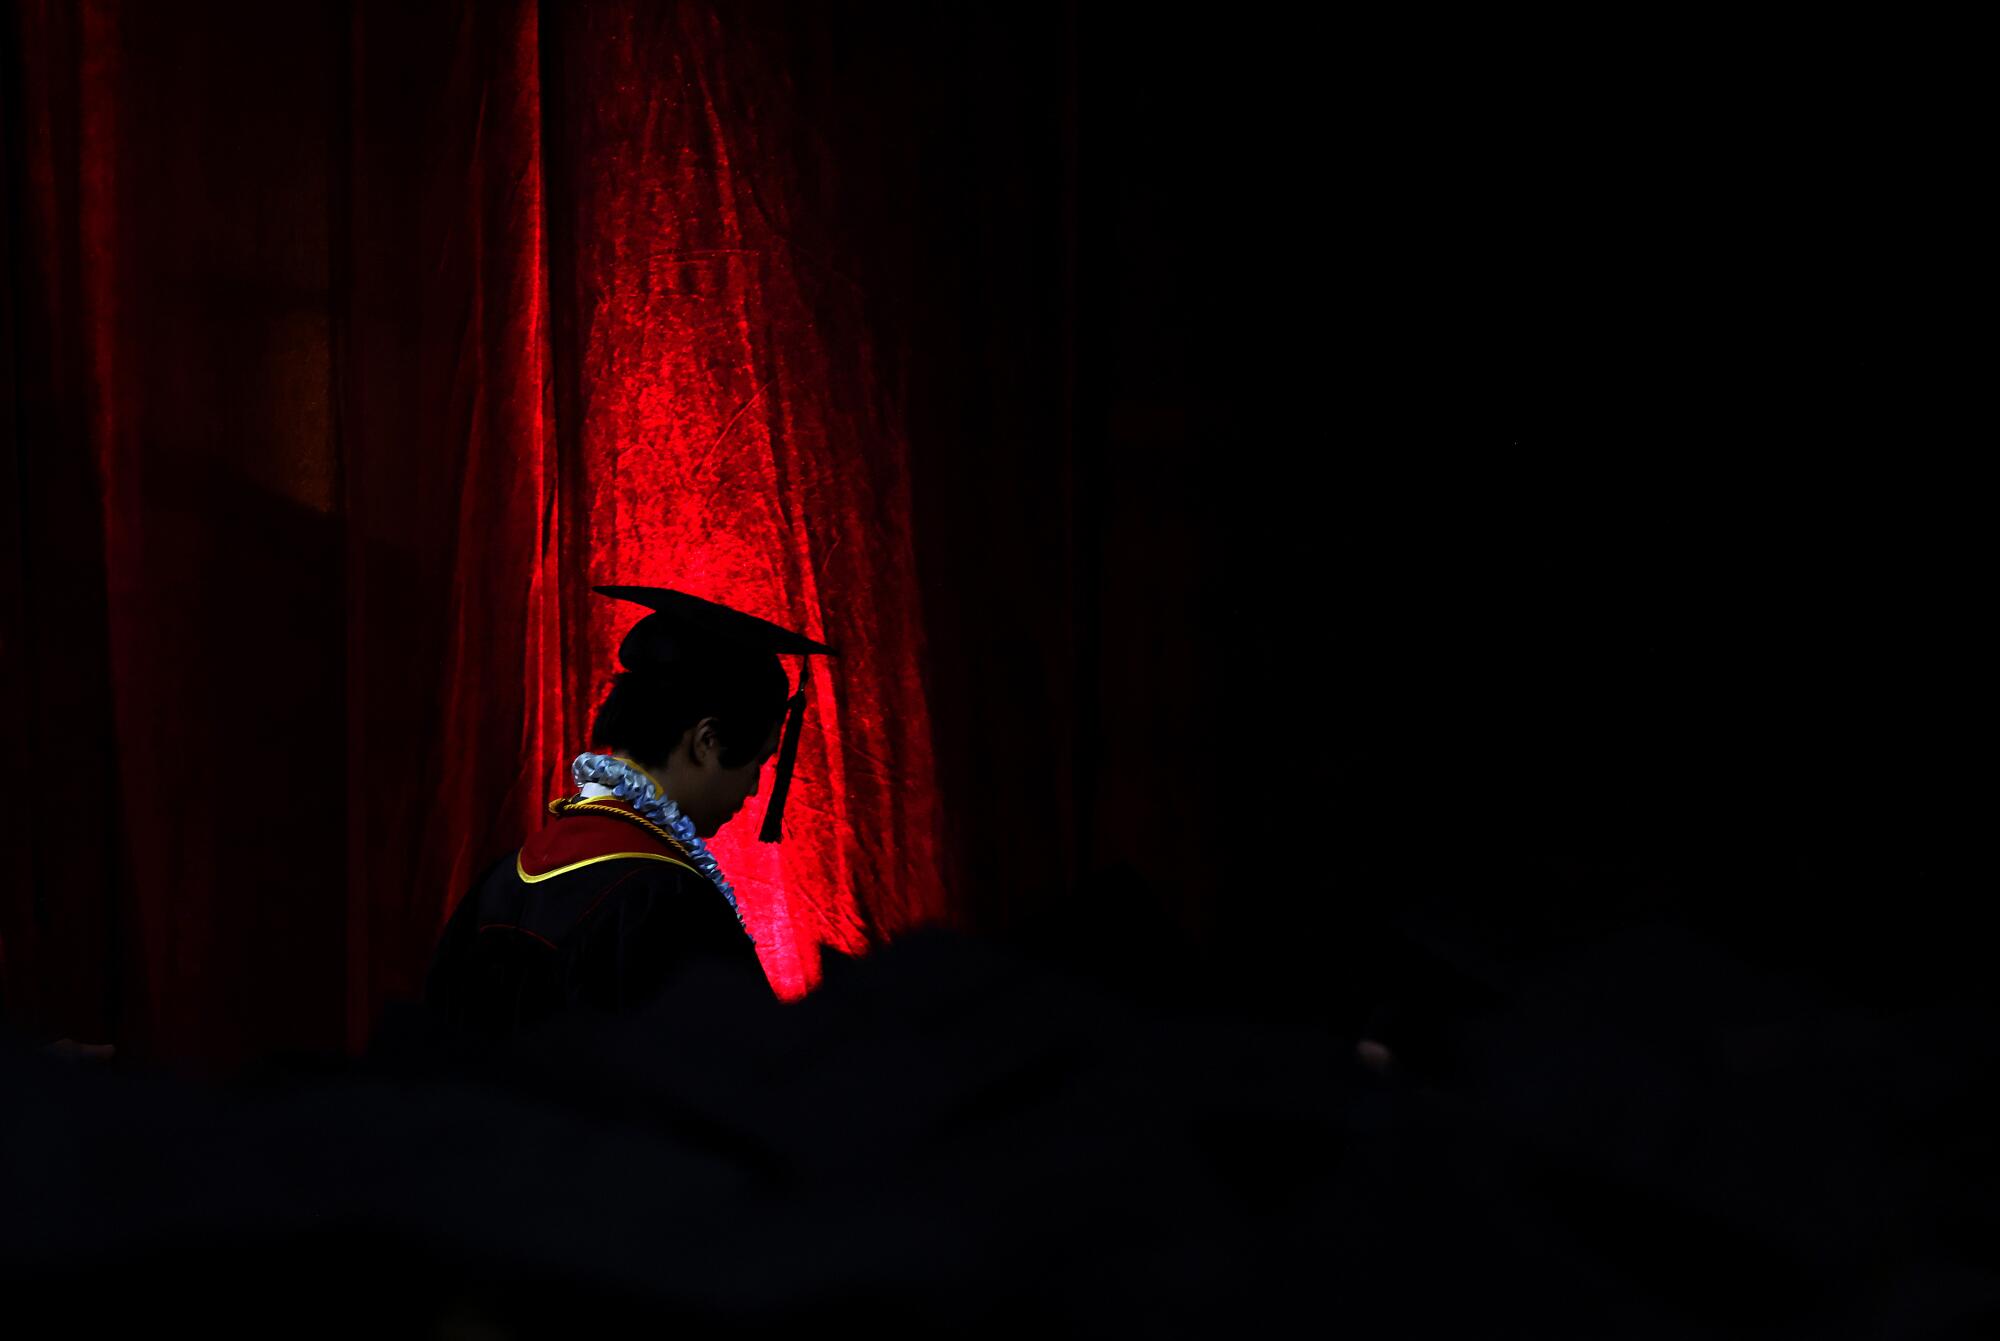 A USC student in graduation regalia is partially silhouetted near a red curtain